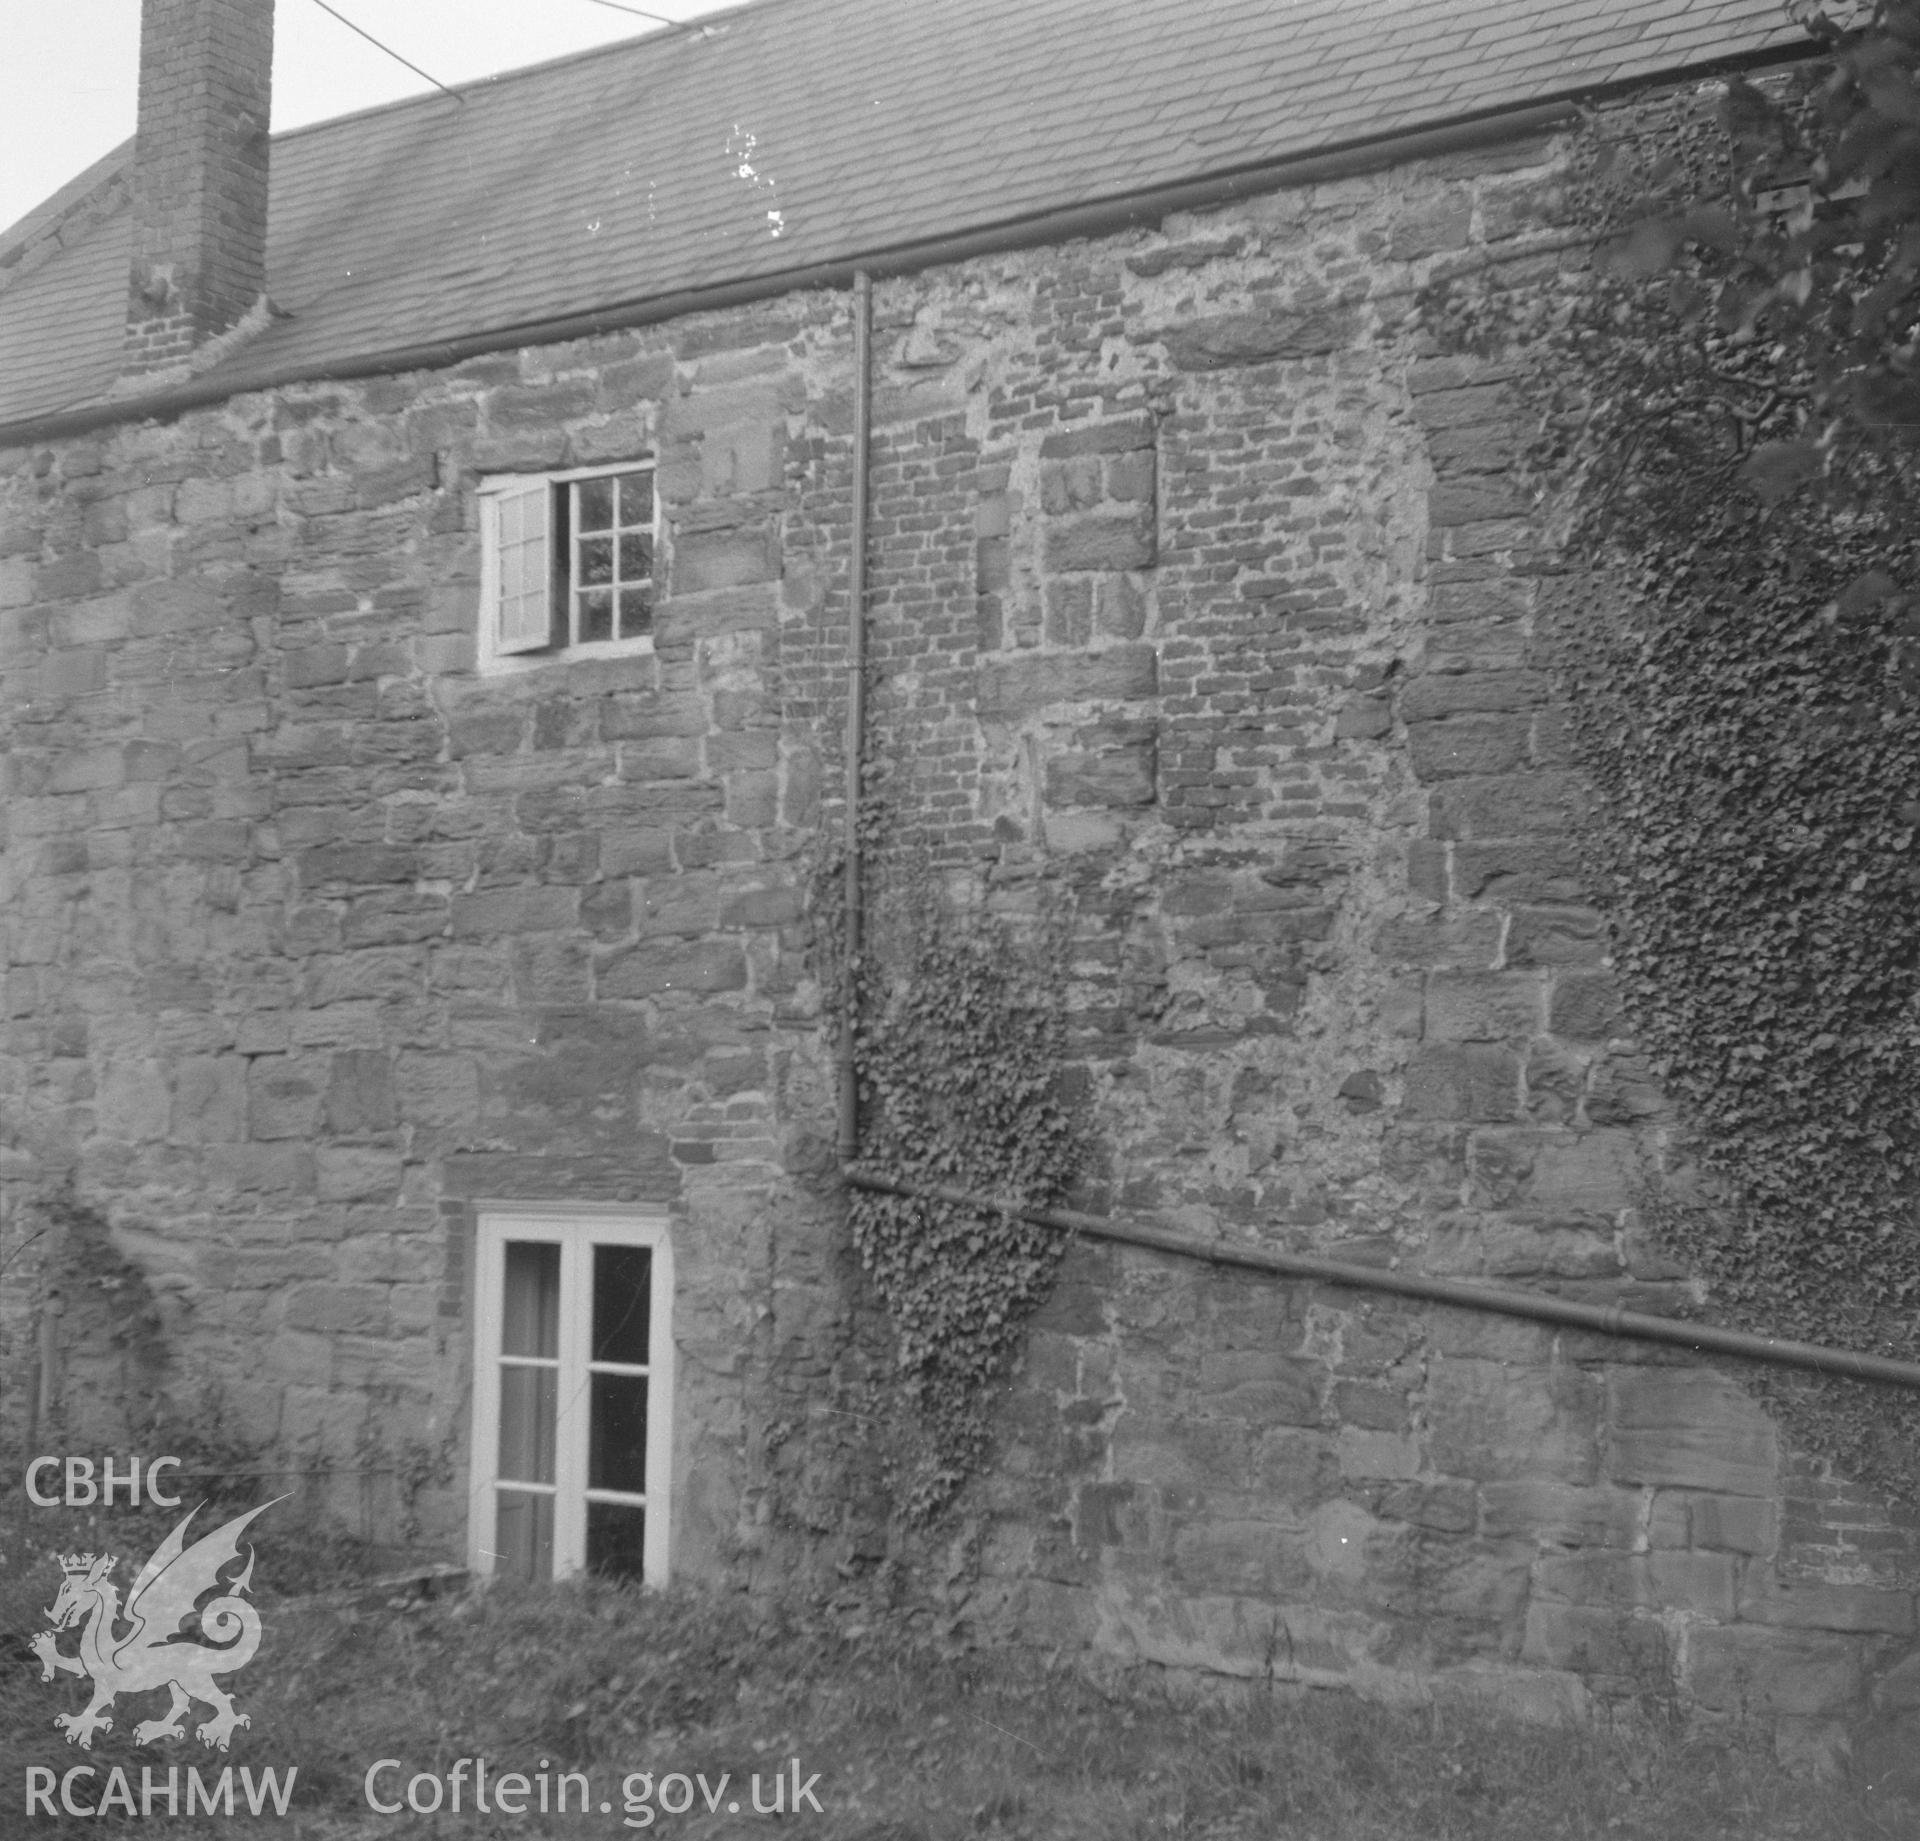 Digital copy of a black and white nitrate negative showing rear elevation of Llyseurgain.